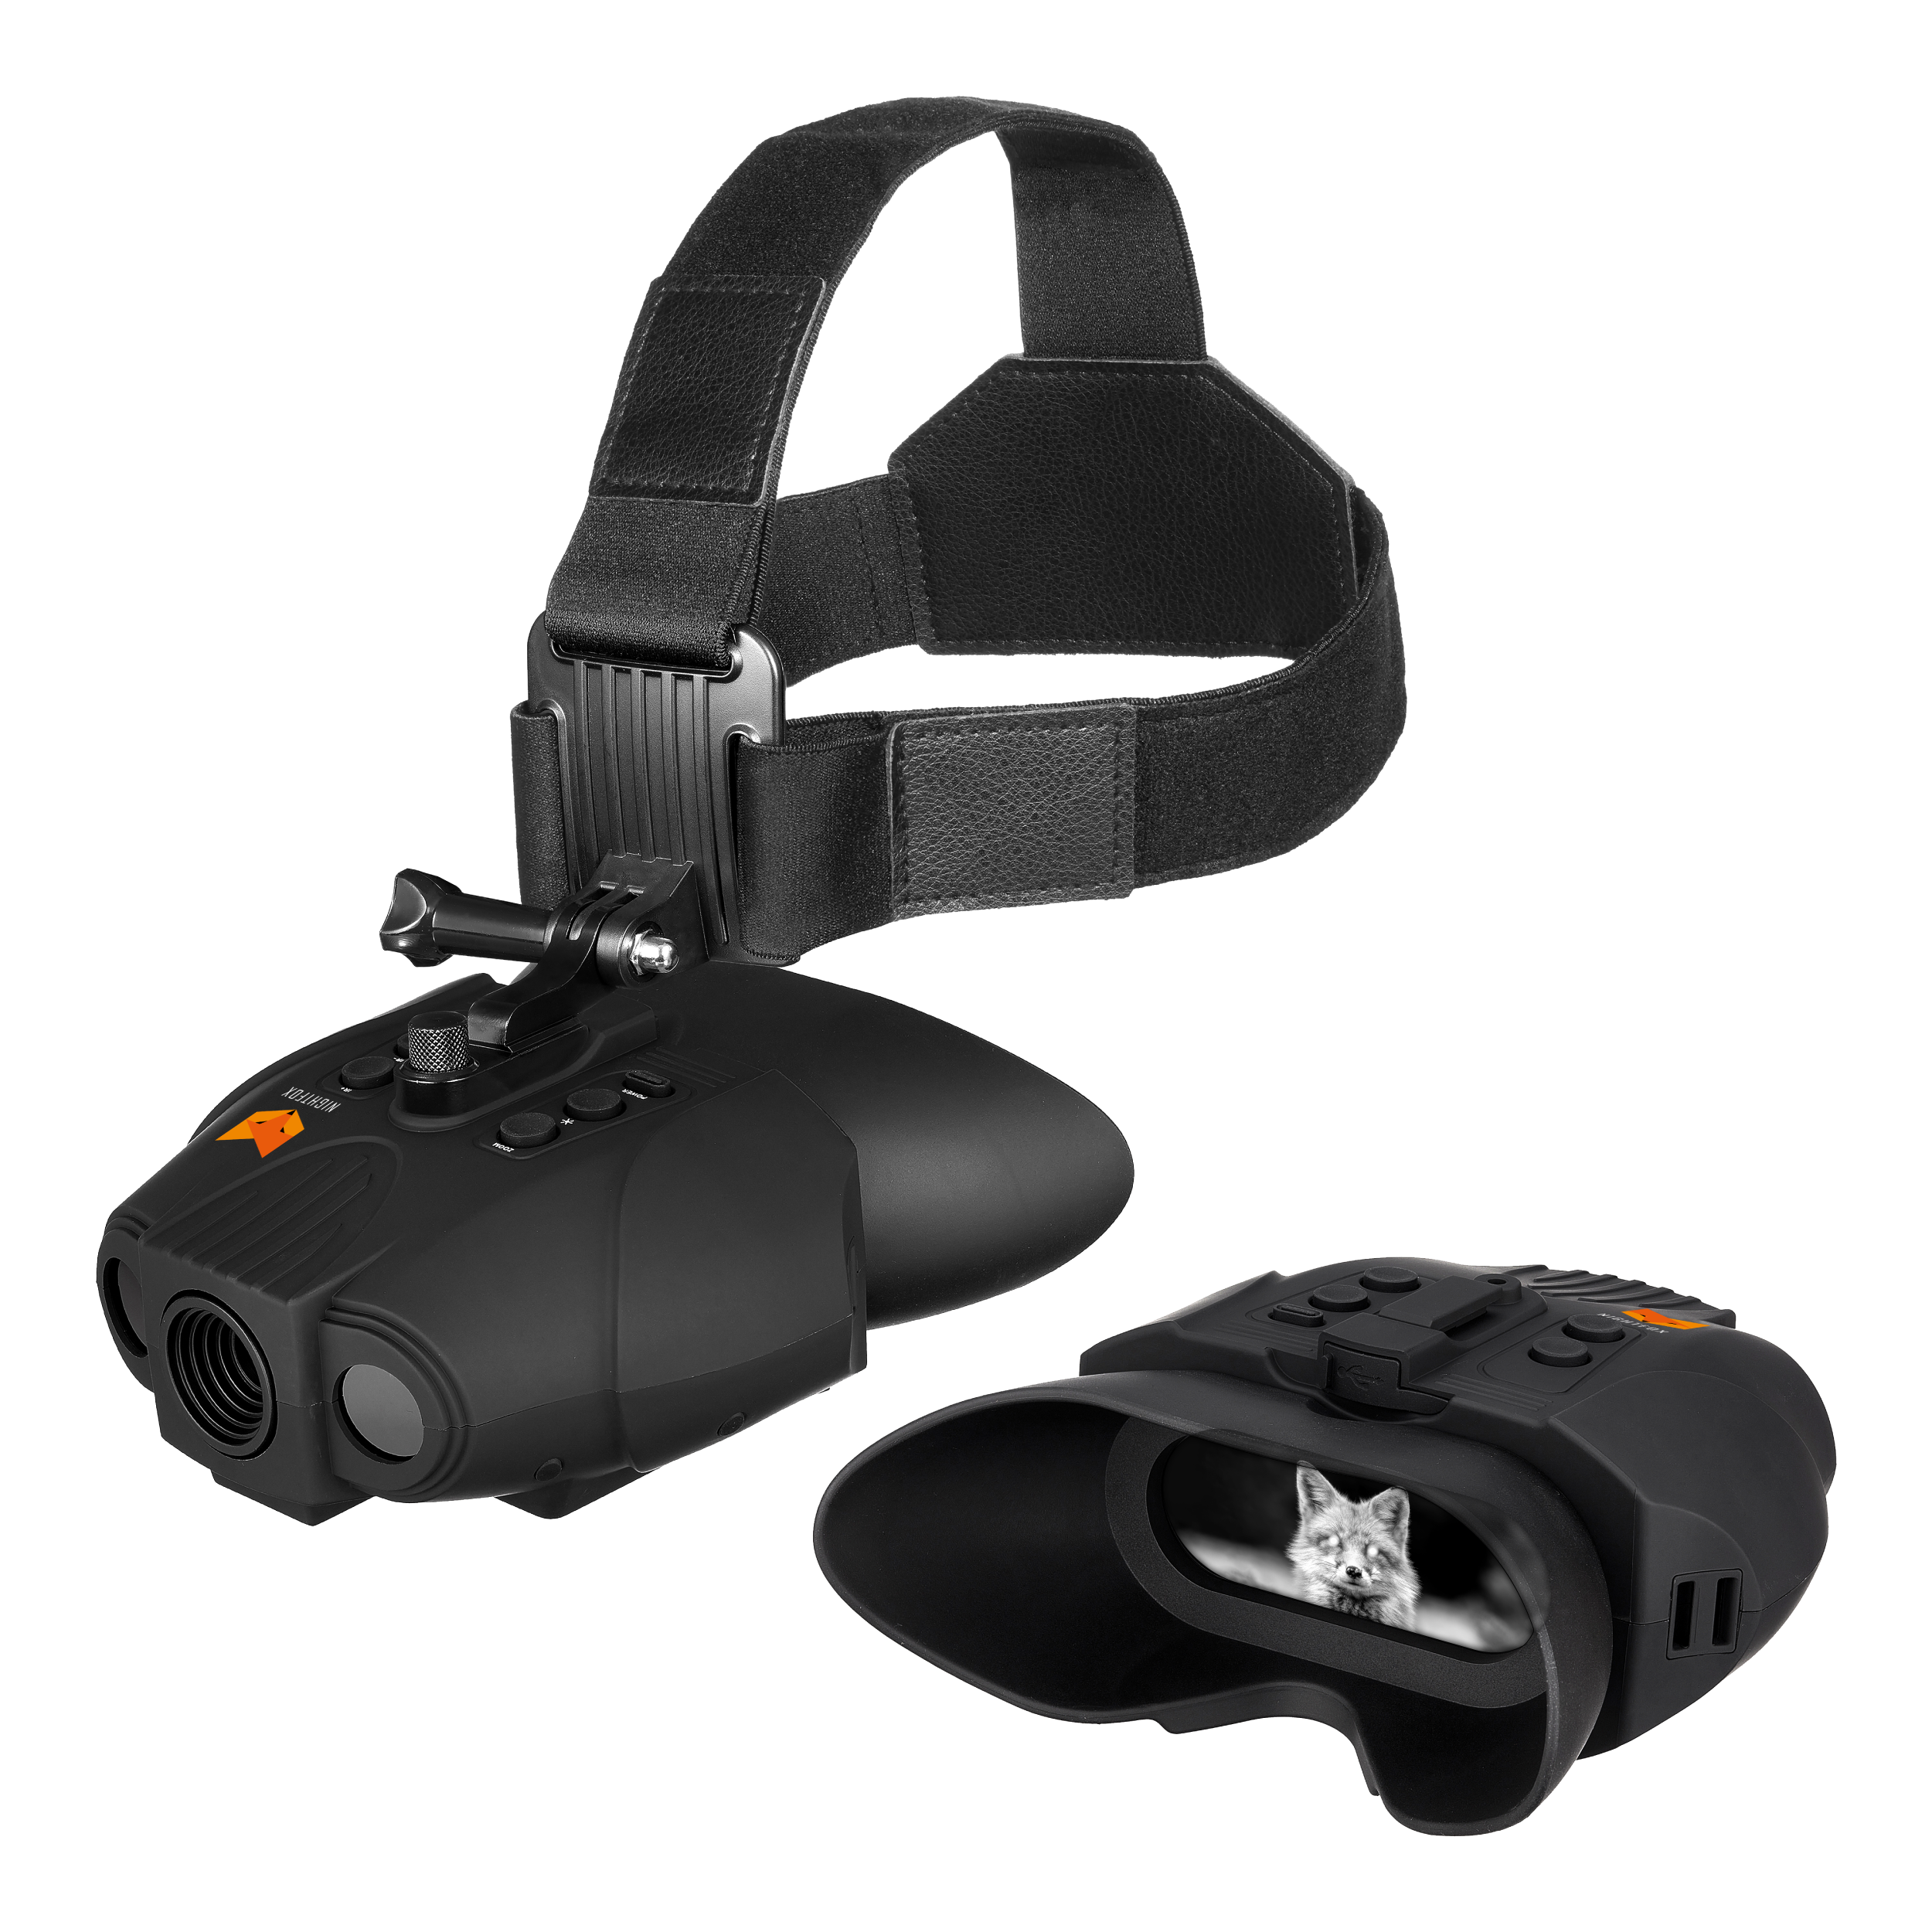 A picture of the Nightfox Swift Night Vision Goggles